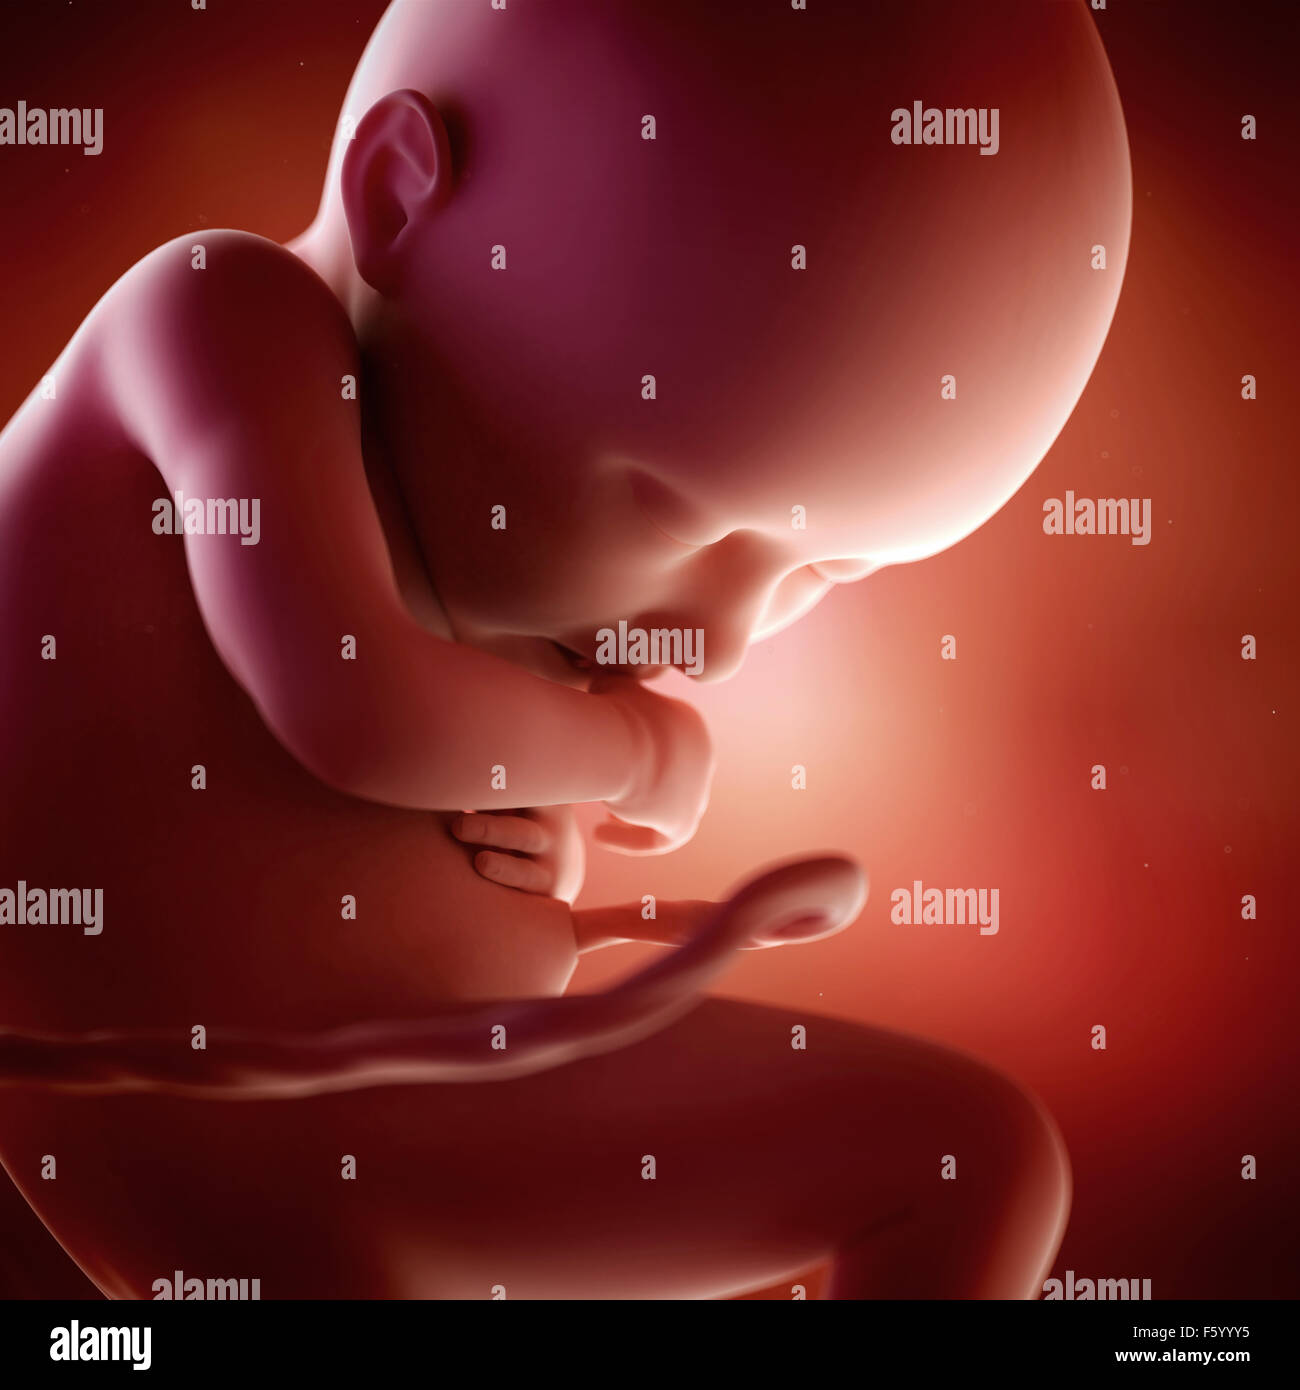 medical accurate 3d illustration of a fetus week 36 Stock Photo